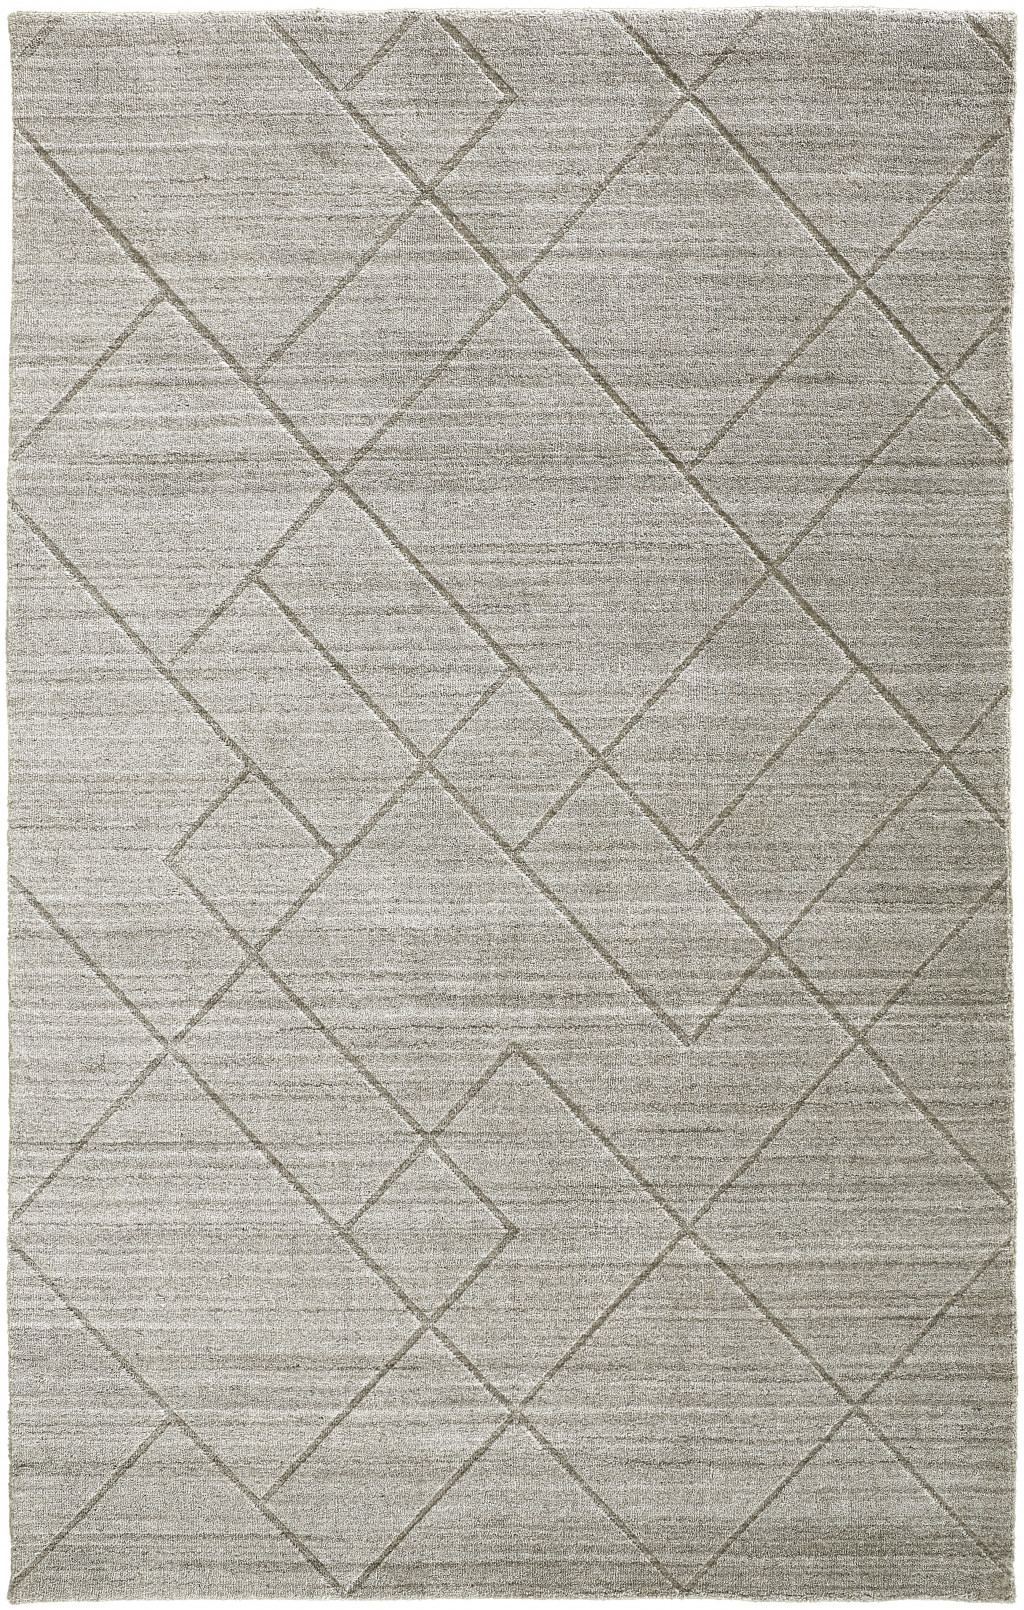 10' X 14' Ivory And Silver Striped Hand Woven Area Rug-514788-1